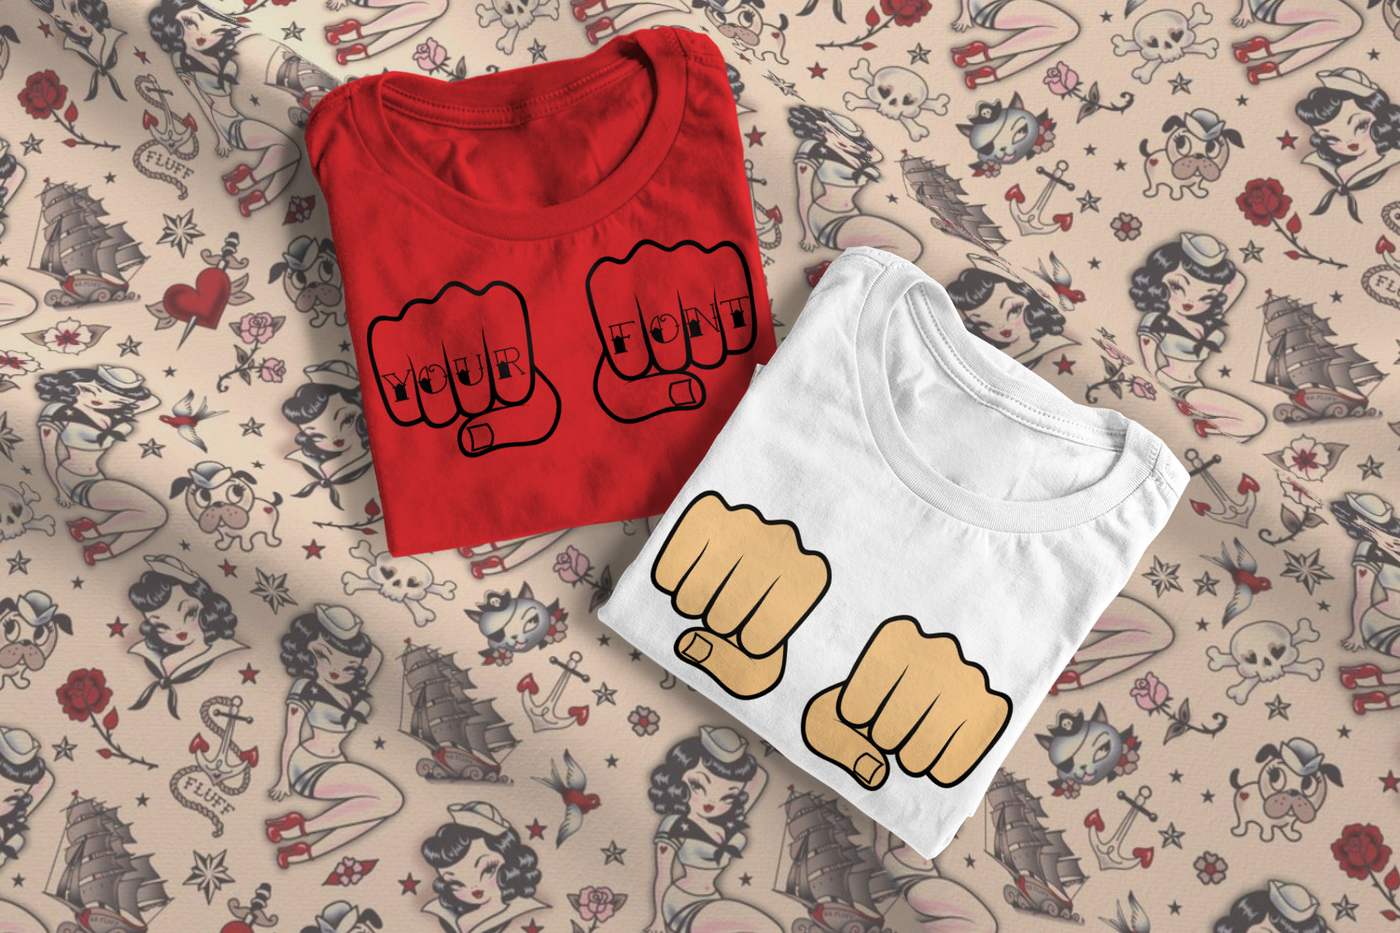 Two folded tees. Each has a pair of fists. One if the shirts has letters on the knuckles spelling out "YOUR FONT"